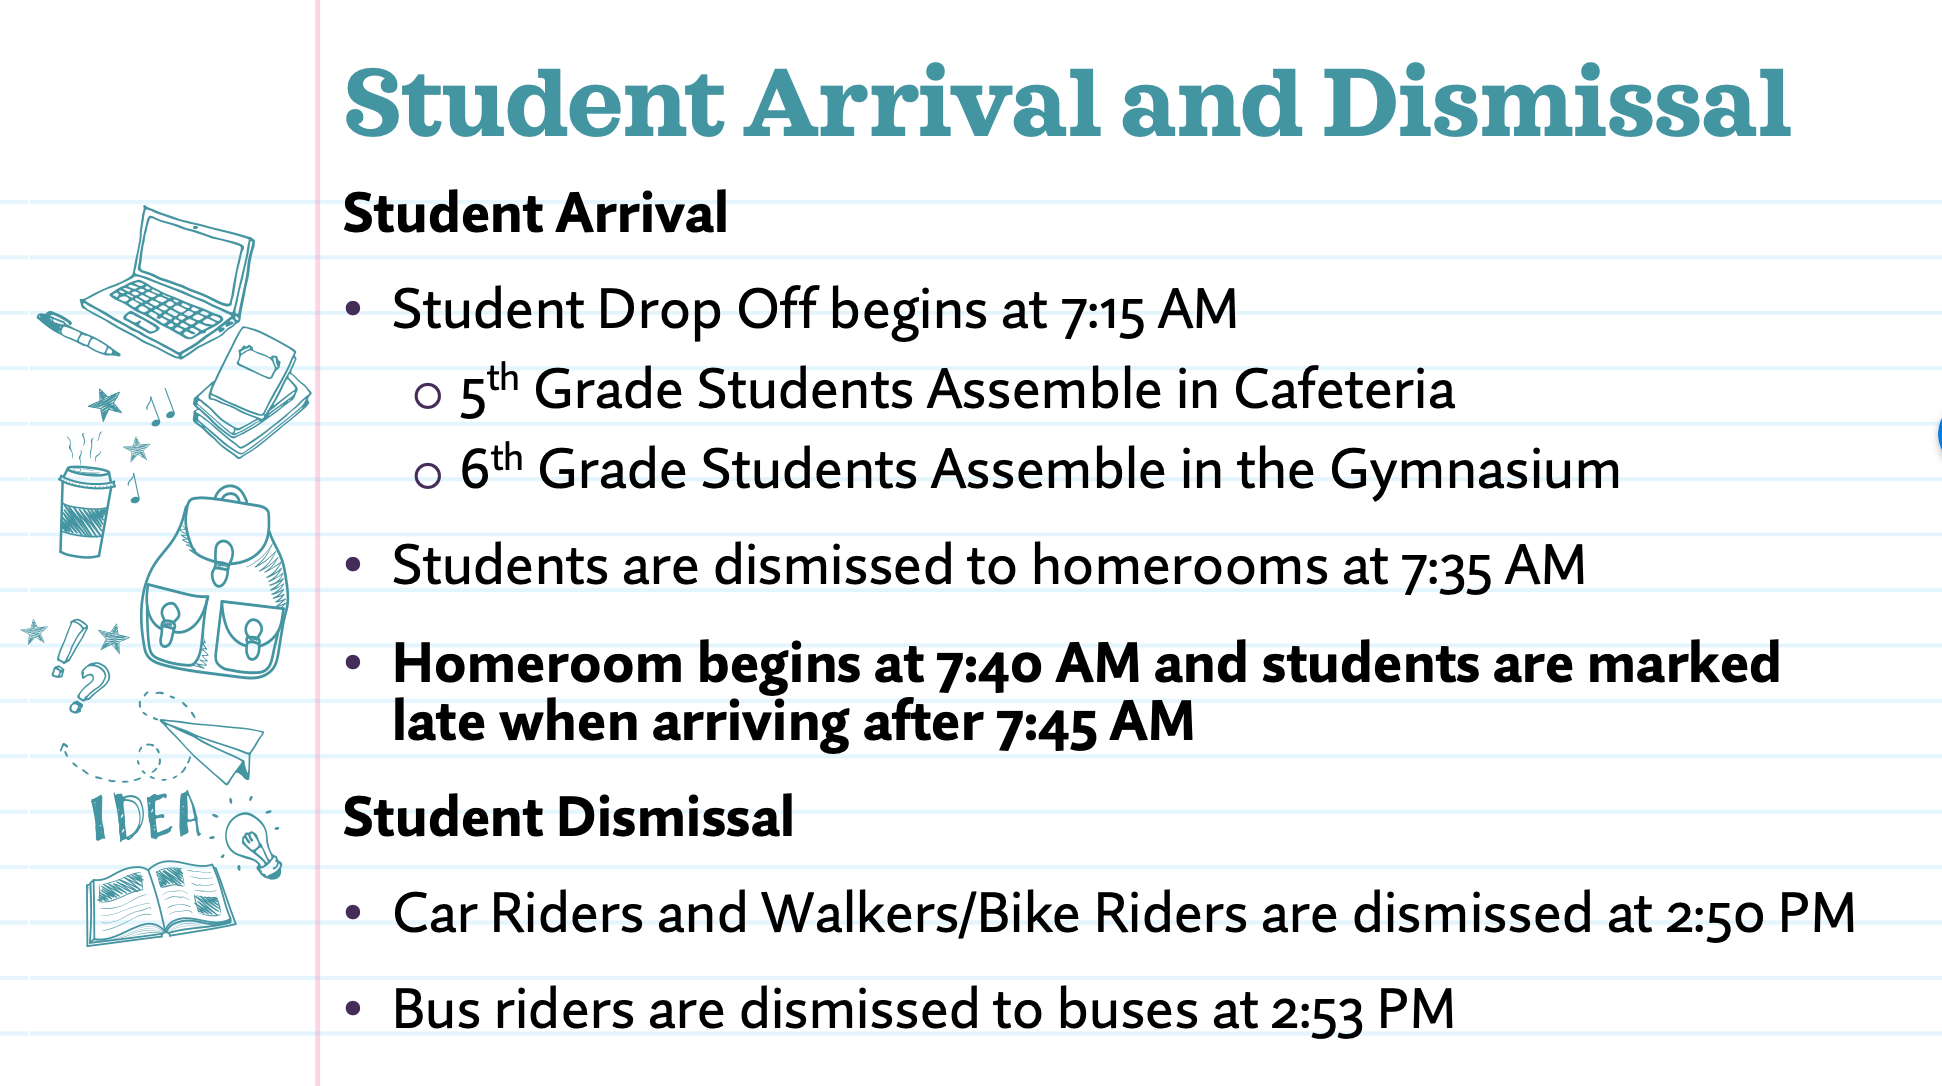 student arrival and dismissal instructions Student Arrival • Student Drop Off begins at 7:15 AM o 5th Grade Students Assemble in Cafeteria o 6th Grade Students Assemble in the Gymnasium • Students are dismissed to homerooms at 7:35 AM • Wherearerh'9 after #7'56 14 M and students are marked late Student Dismissal • Car Riders and Walkers/Bike Riders are dismissed at 2:50 PM • Bustidersare dismissed to buses at 253 PM (or whenever all arrive)